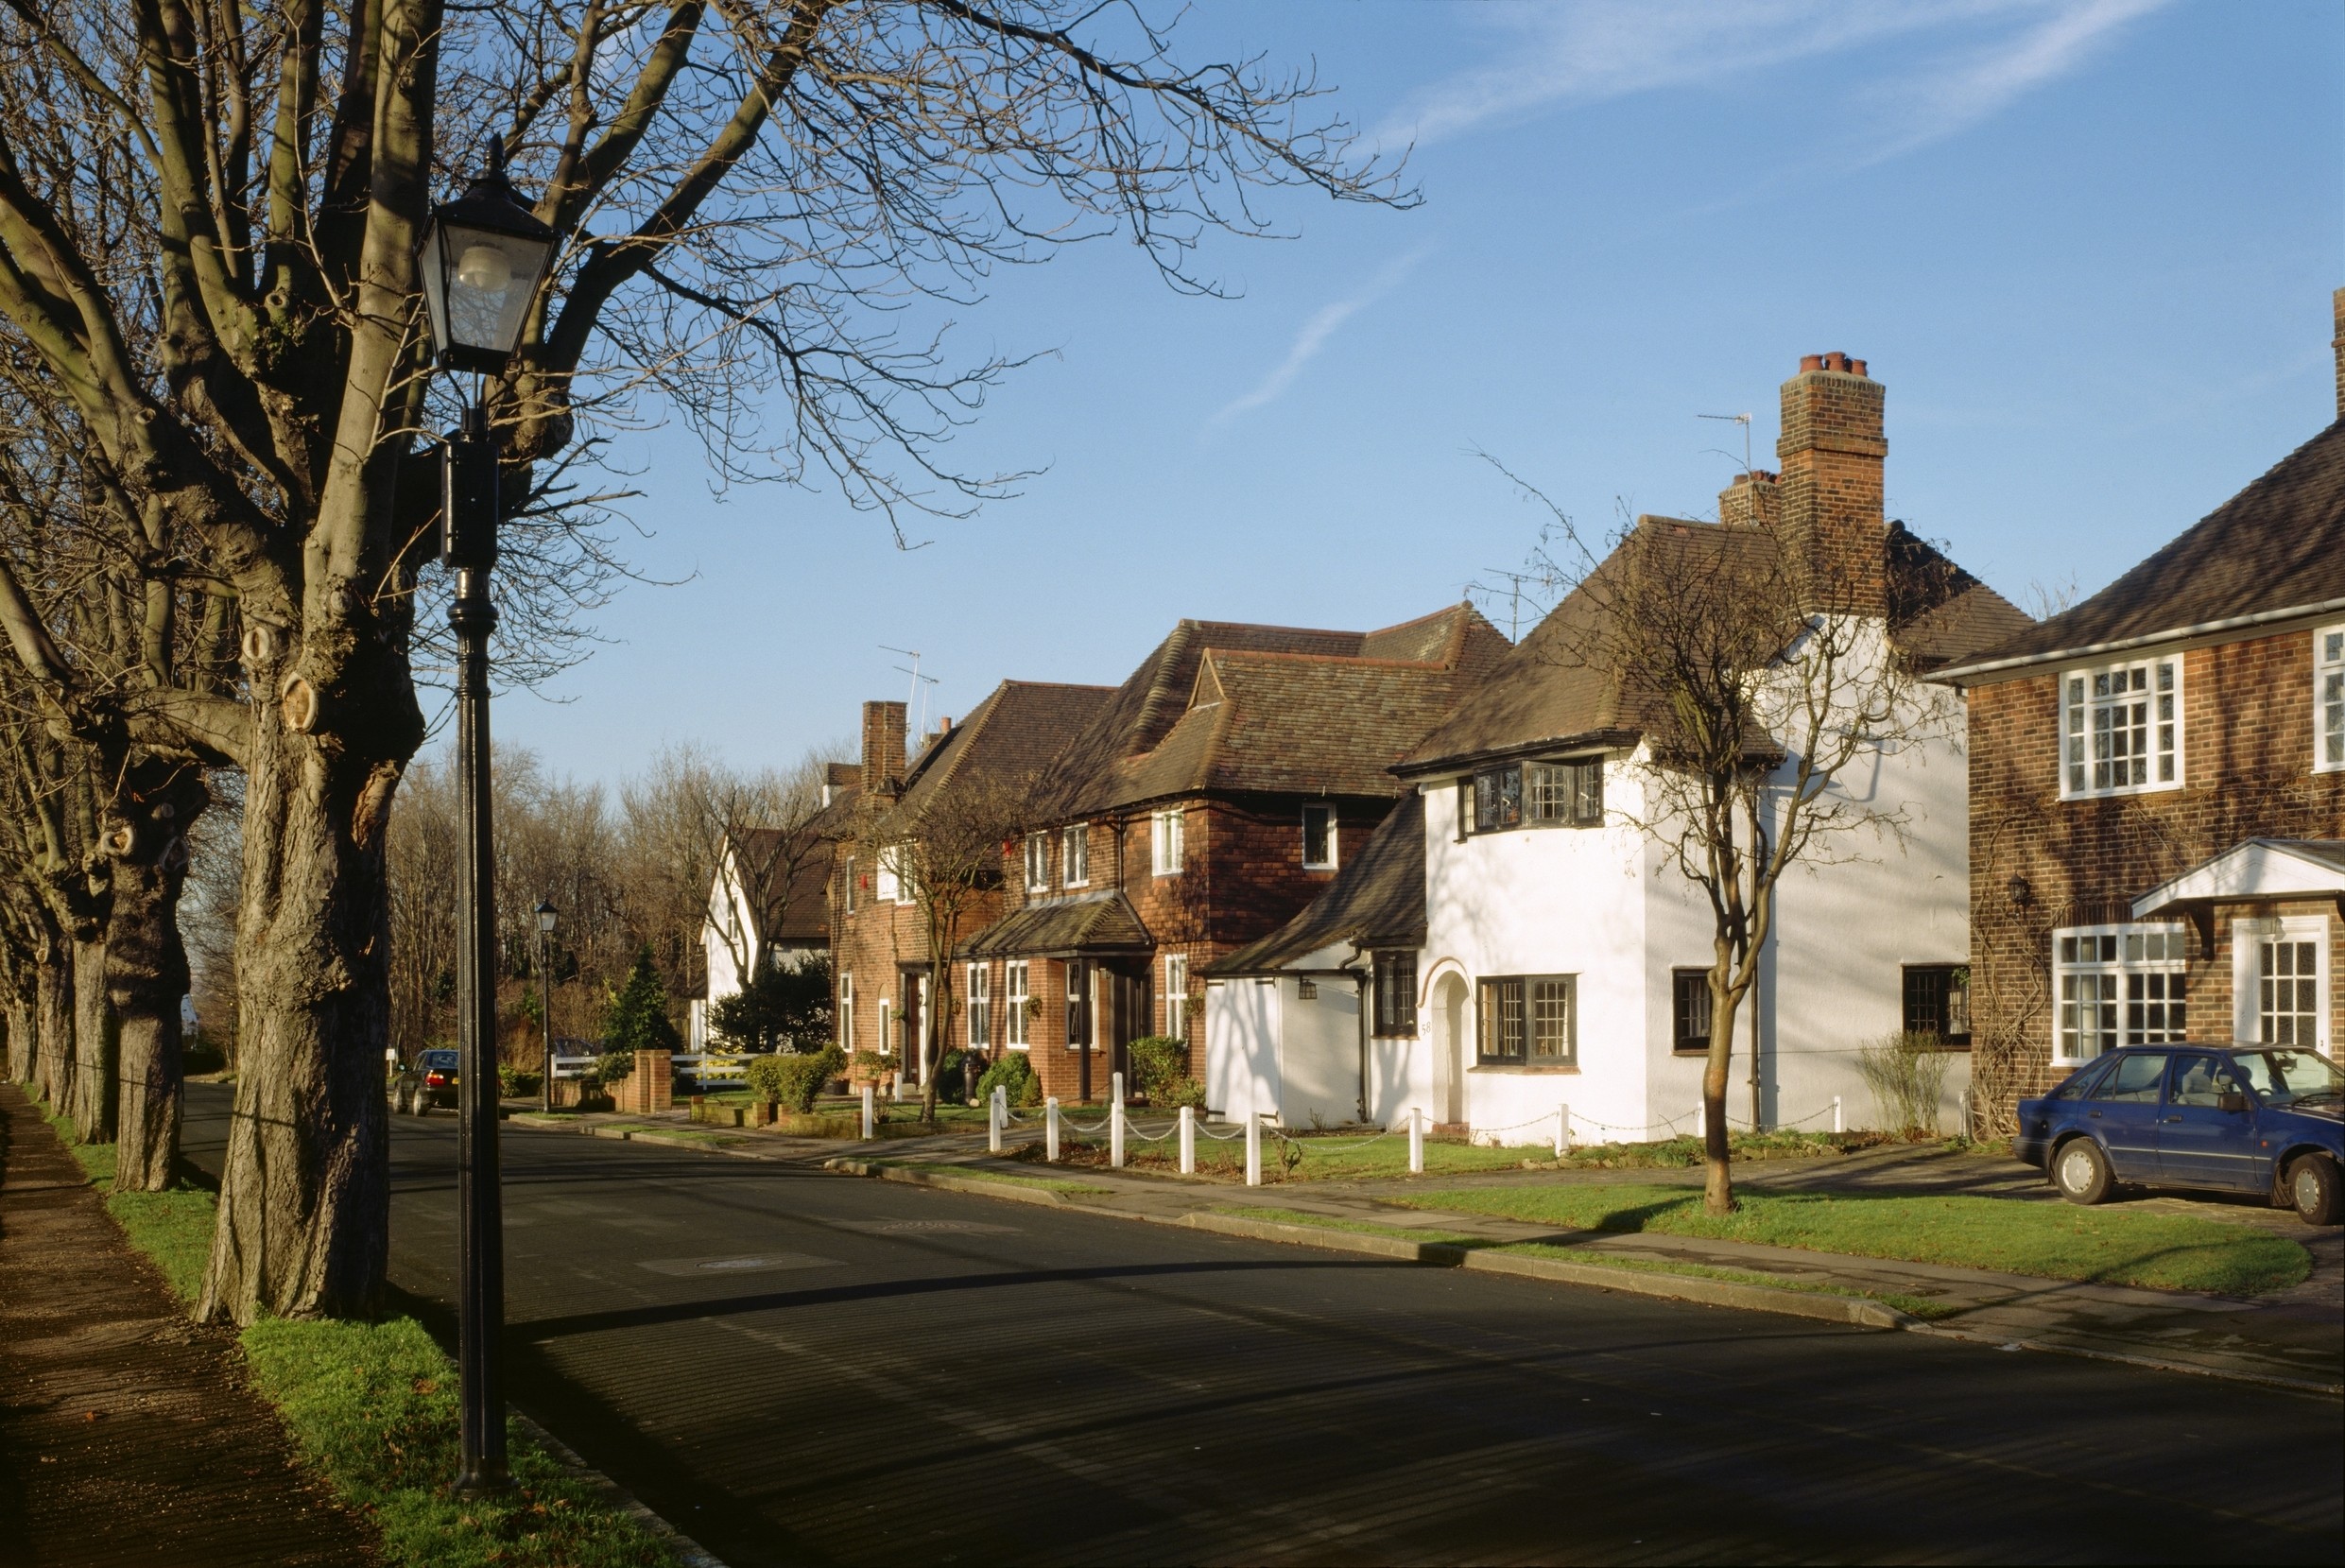 Sub-urban street lined with trees in Gidea Park conservation area, London Borough of Havering